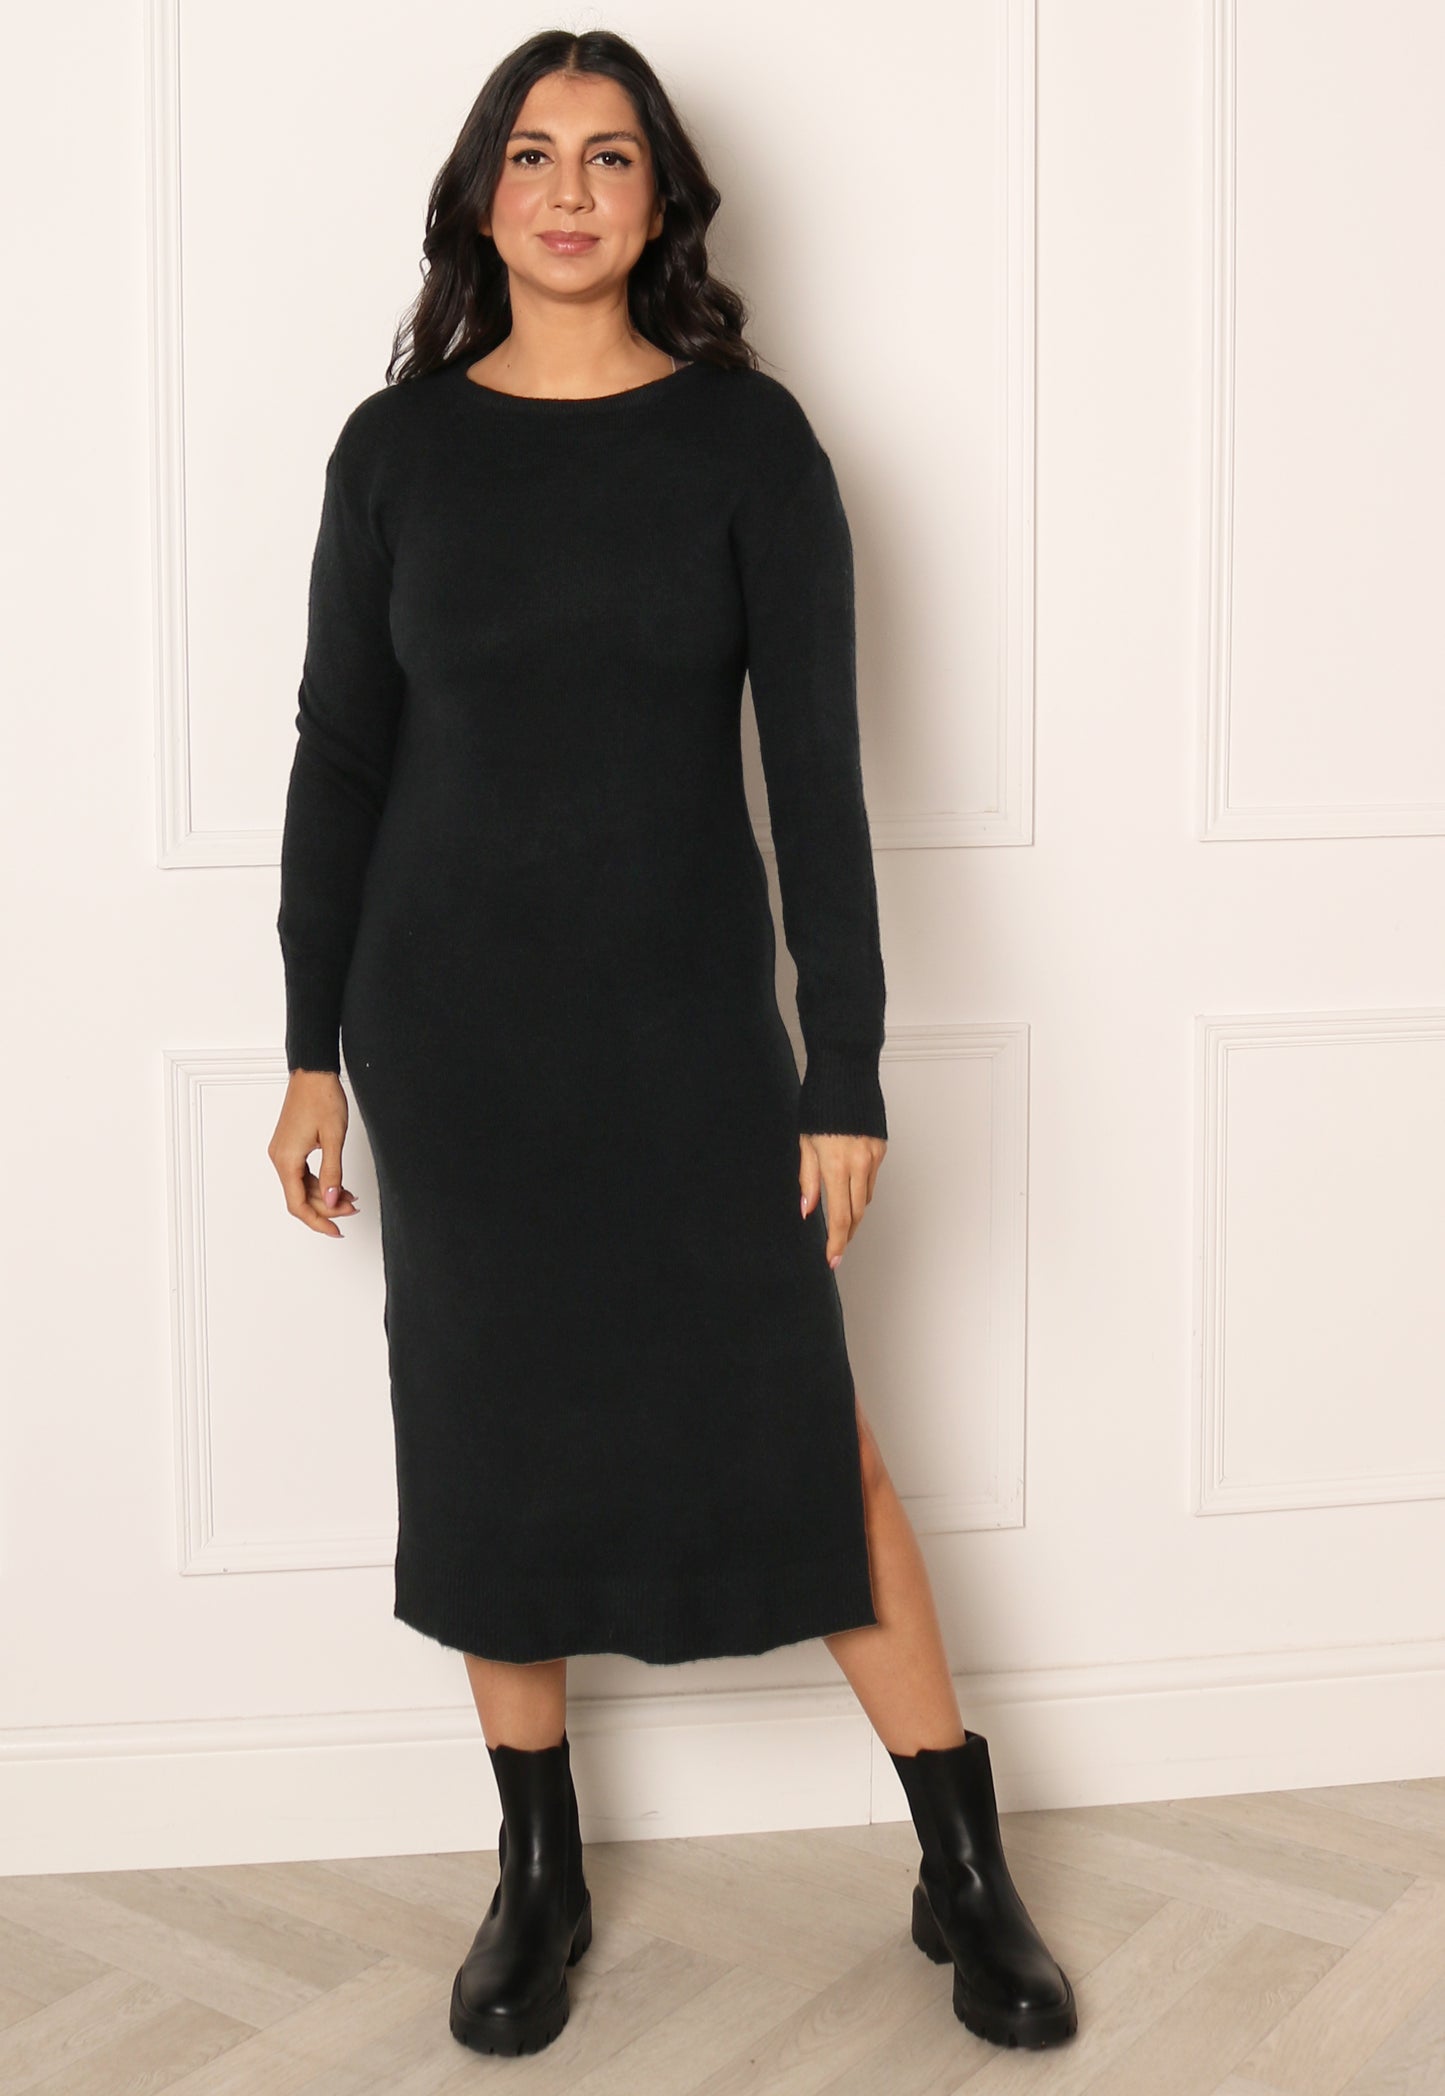 VERO MODA Lefile Long Sleeve Boat Neck Knitted Midi Dress with Side Splits in Black - One Nation Clothing